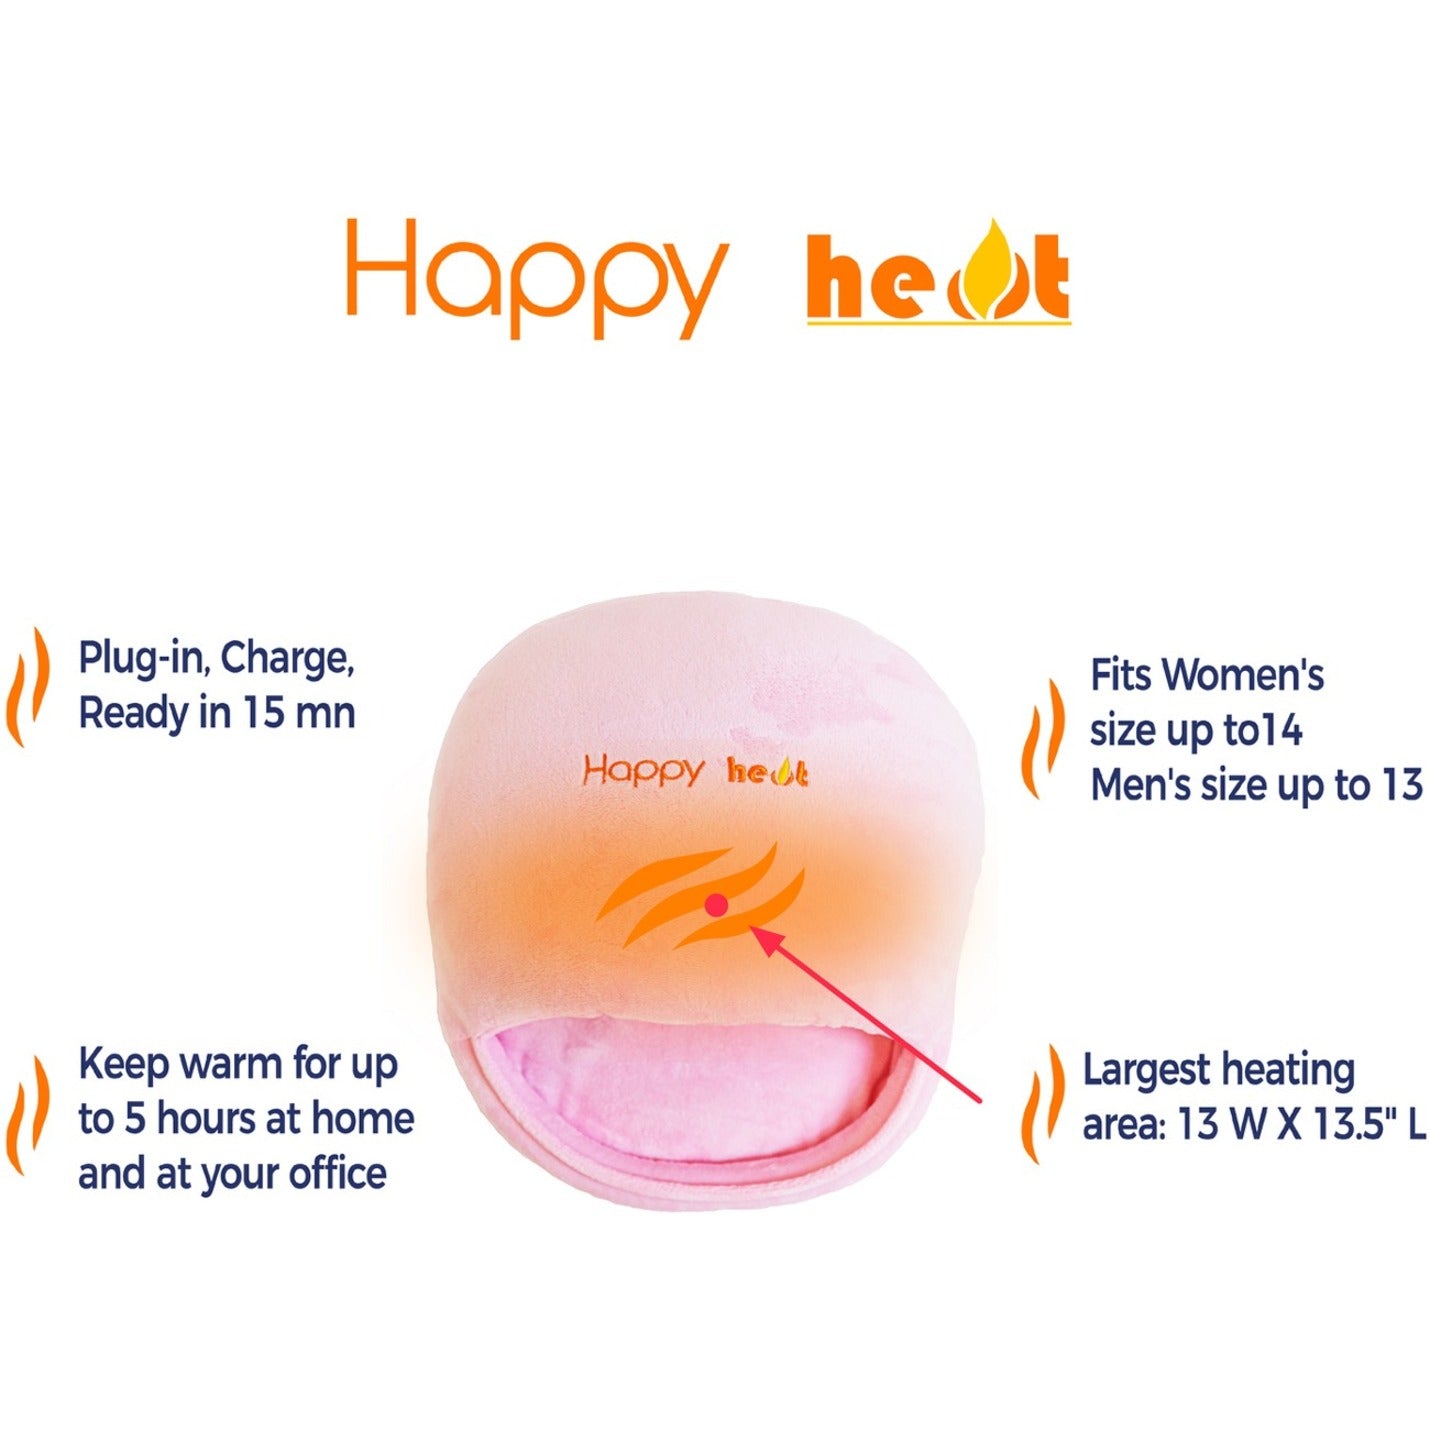 Happy Heat Electric Rechargeable Foot Warmer - Pink [Discontinued]